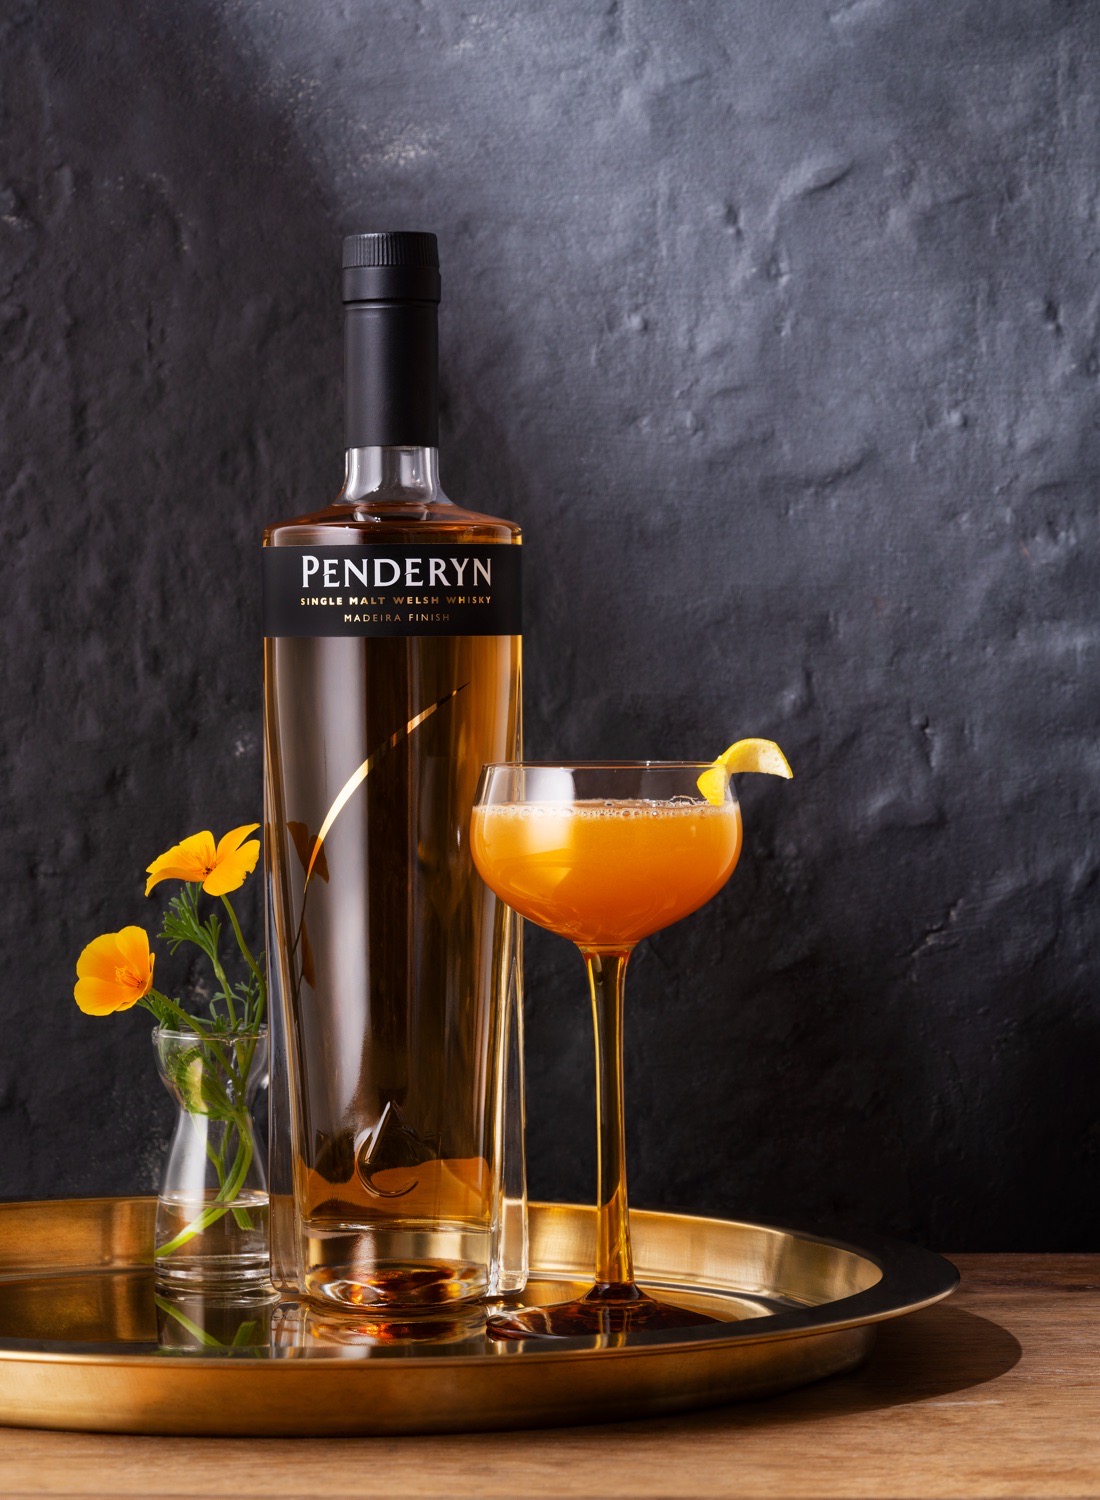 Penderyn Madeira Whisky bottle next to a cocktail glass filled with the Welsh Gold cocktail